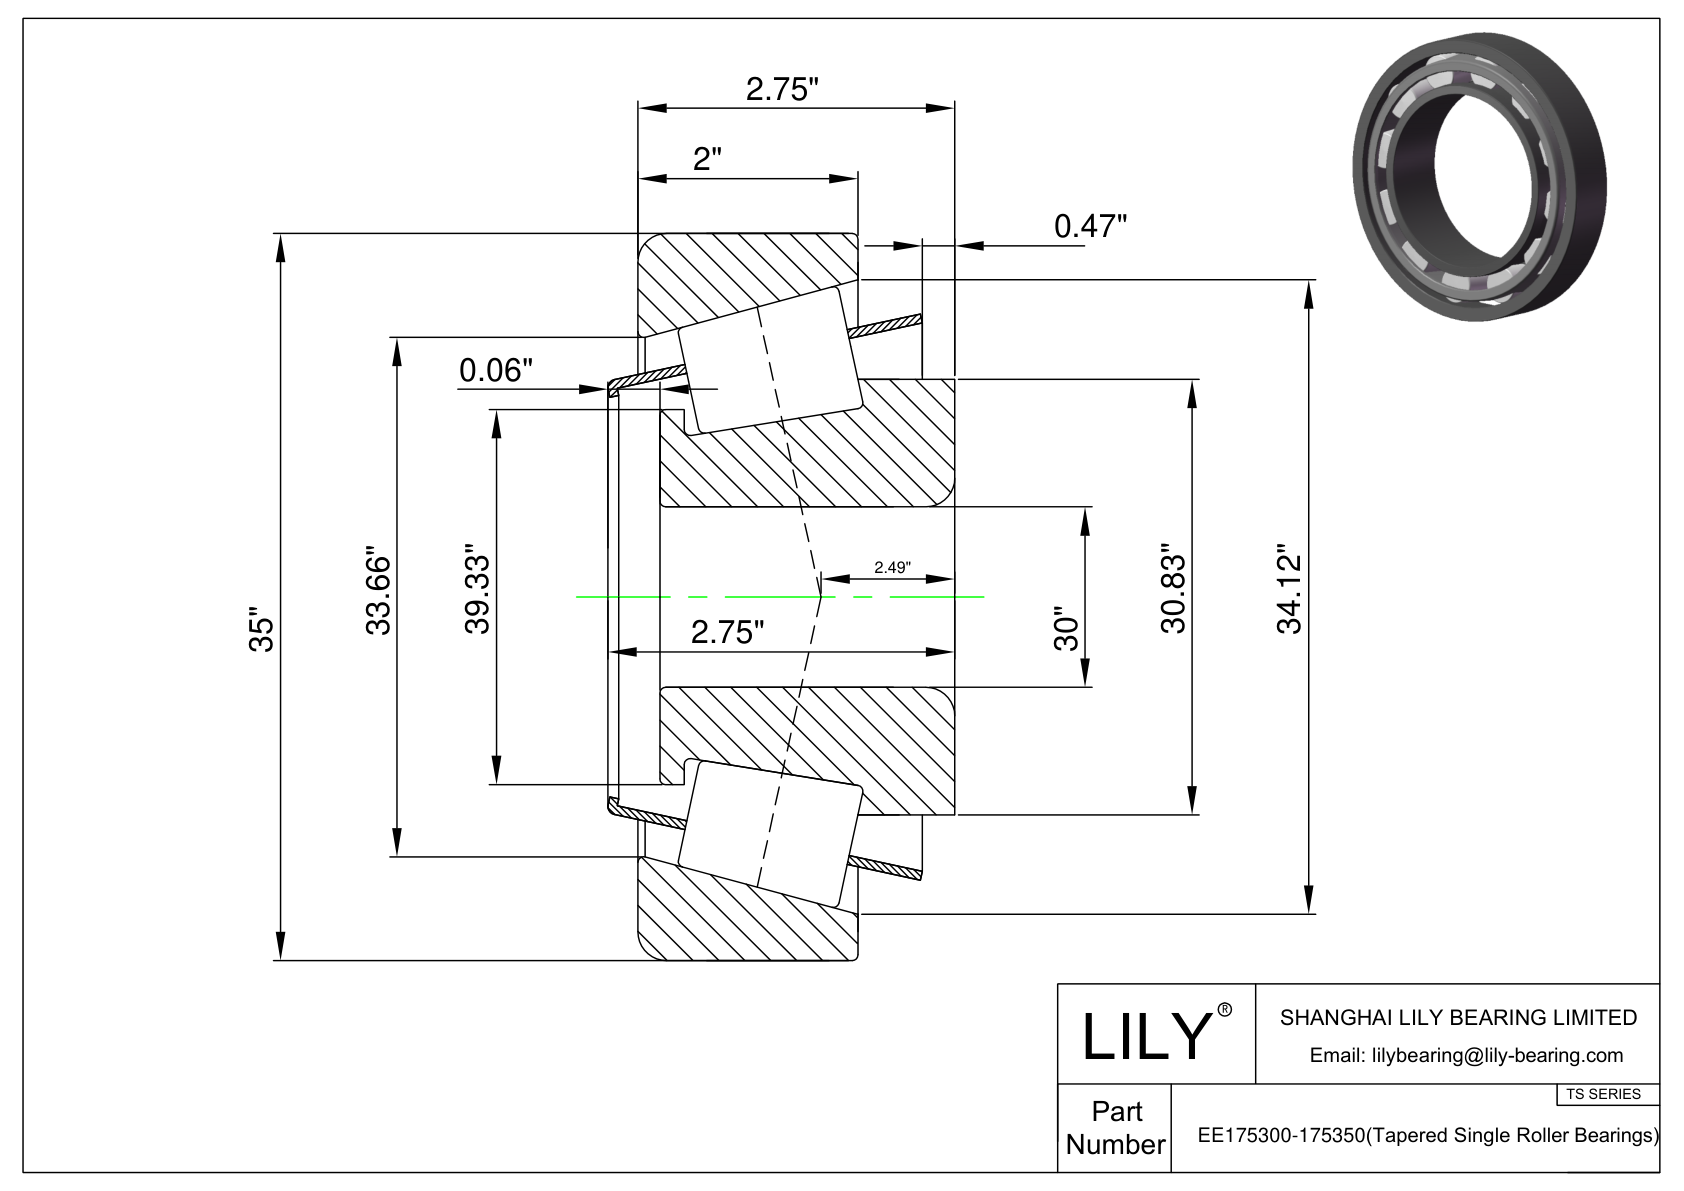 EE175300-175350 TS (Tapered Single Roller Bearings) (Imperial) cad drawing